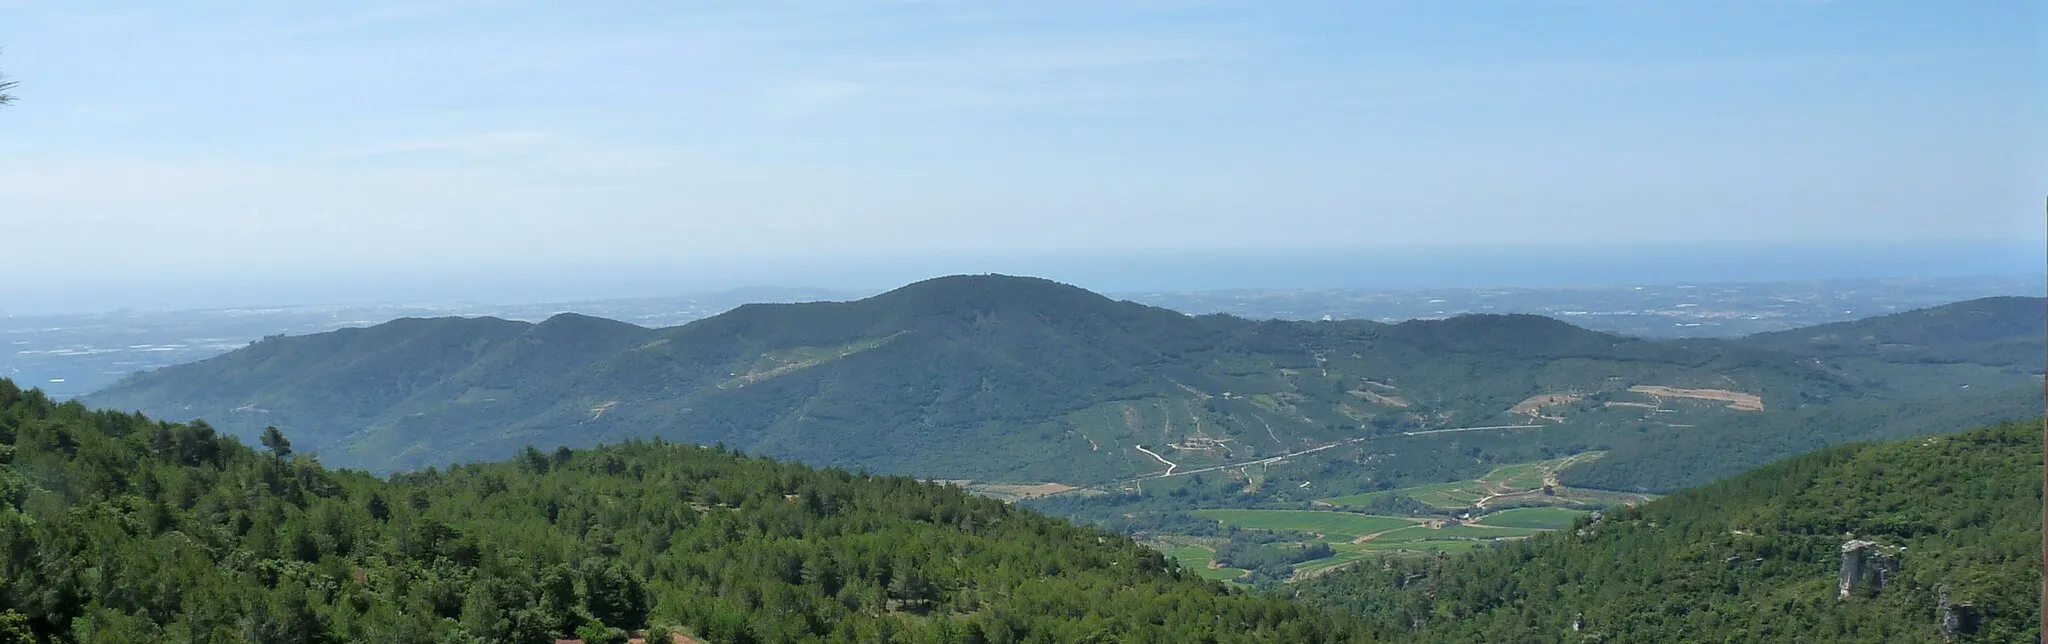 Photo showing: The Puig d'en Cama seen from the north, near l'Albiol. Between there are the ravine of the Trilles (on the right) and the stream of la Selva del Camp (on the left). Above the ridge, on the left side, there are some trees around the hermitage of Sant Pere de la Selva. Behind the Puig d'en Cama, the Baix Camp on the right and the Tarragonès on the left.